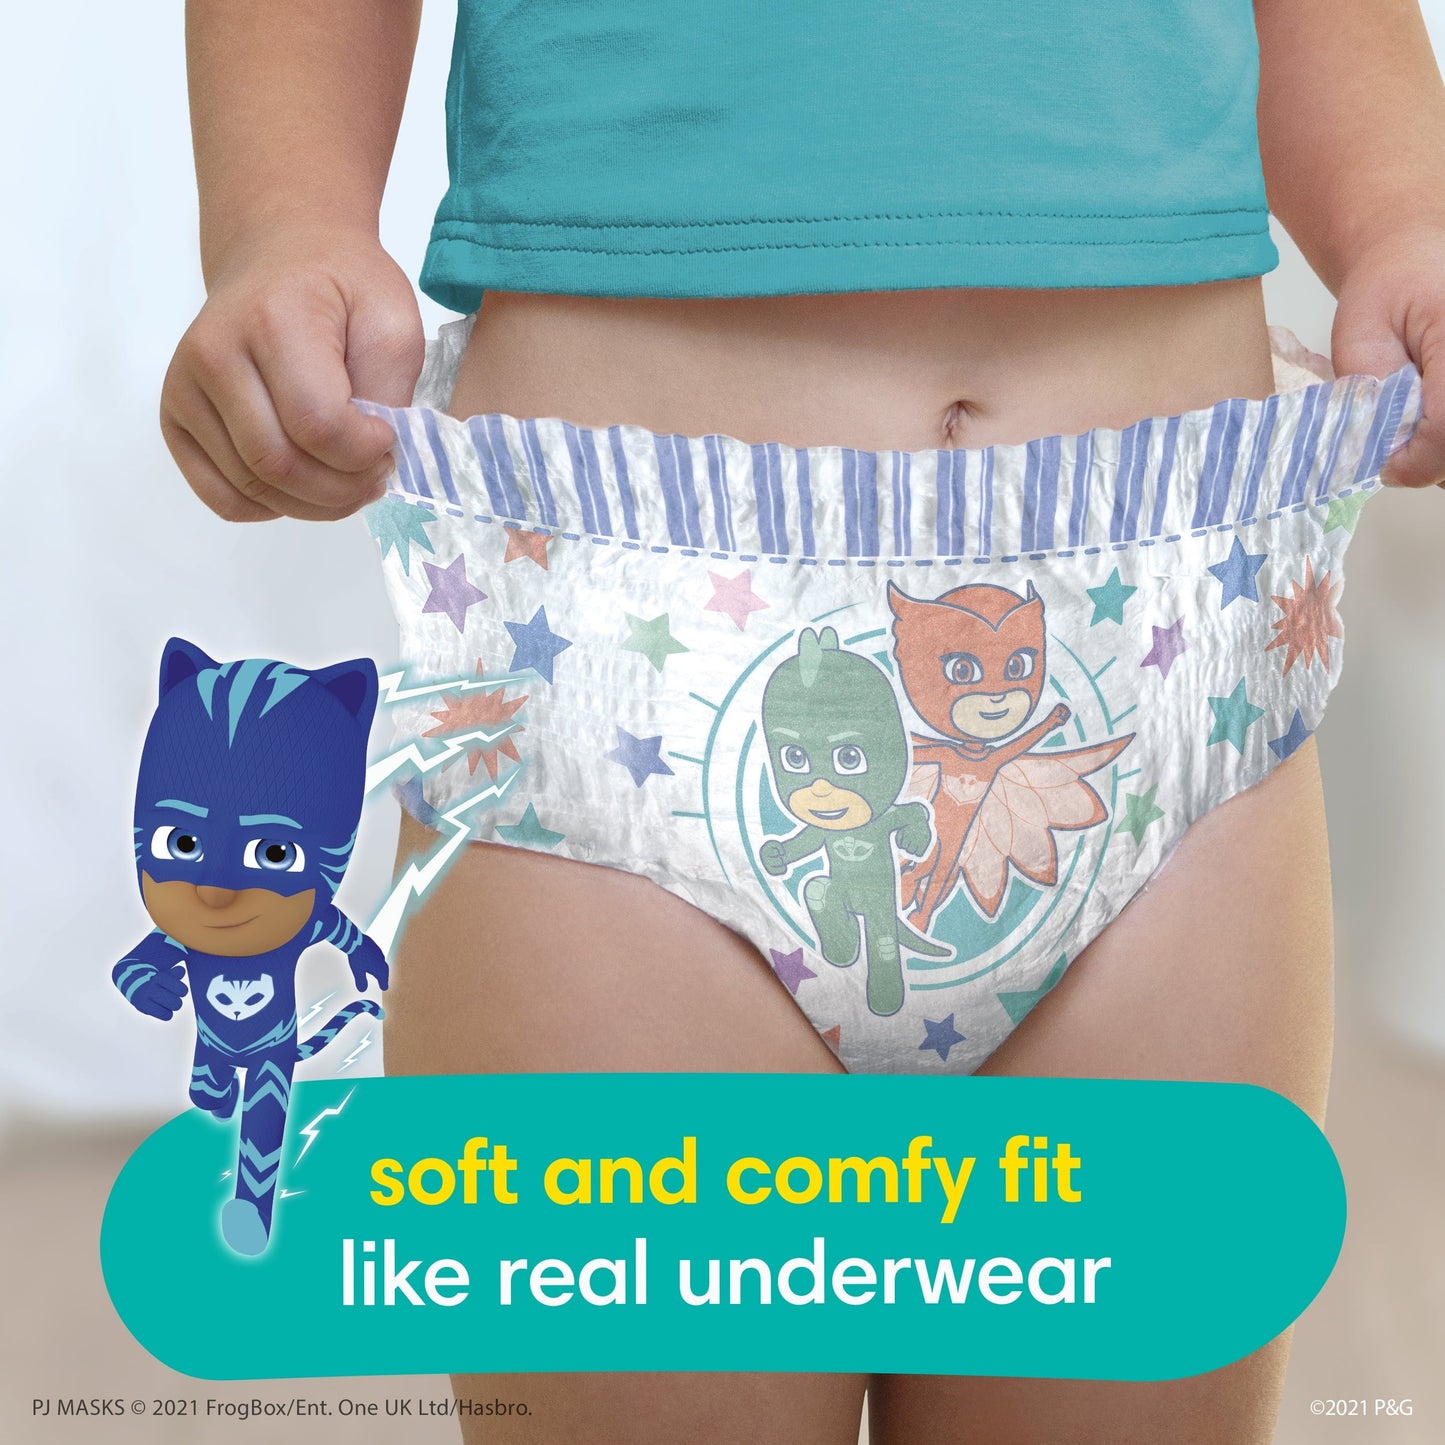 Pampers Easy Ups PJ Masks Training Pants Toddler Boys Size 5T/6T 15 Count